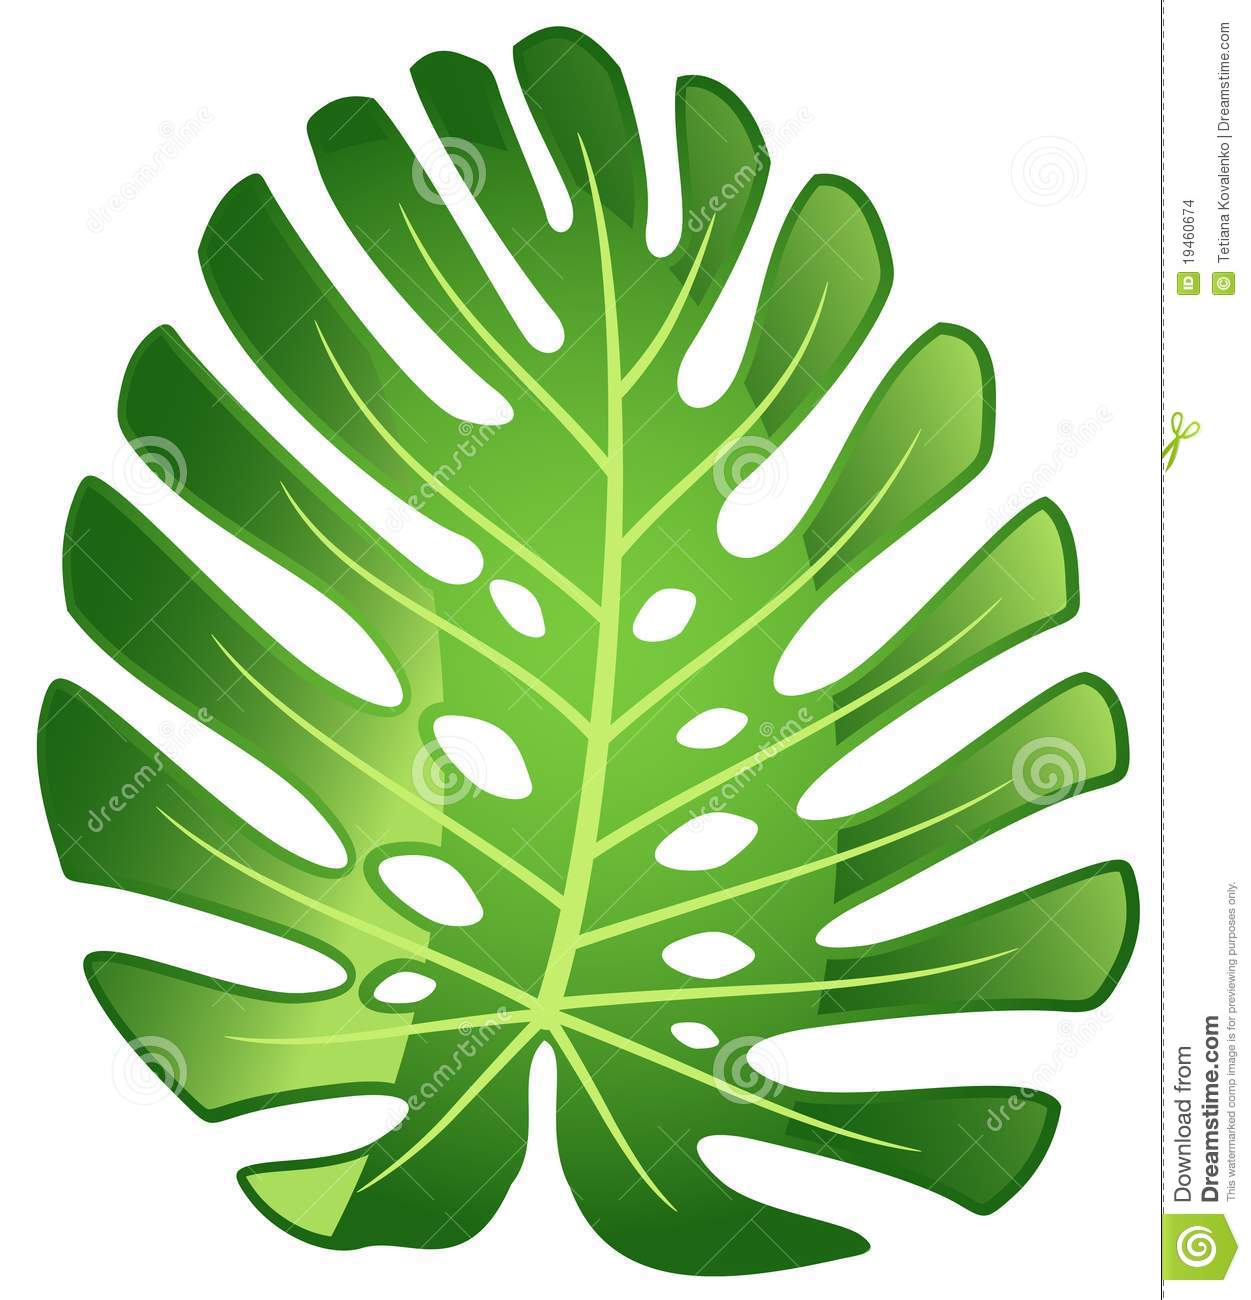 Leaf Tropical Plant   Monstera  Stock Images   Image  19460674